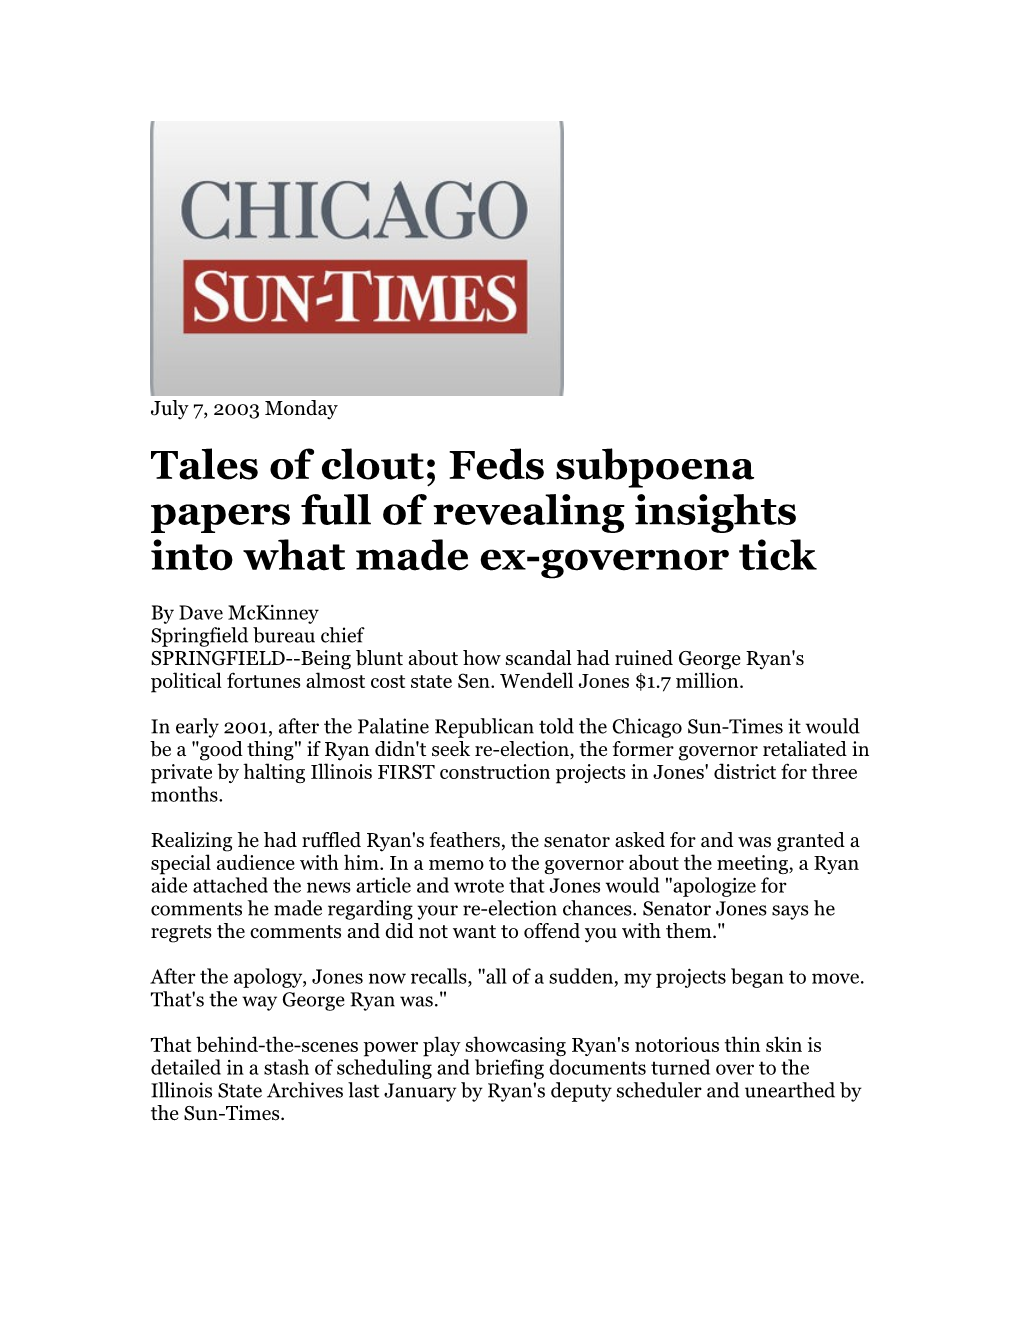 Tales of Clout; Feds Subpoena Papers Full of Revealing Insights Into What Made Ex-Governor